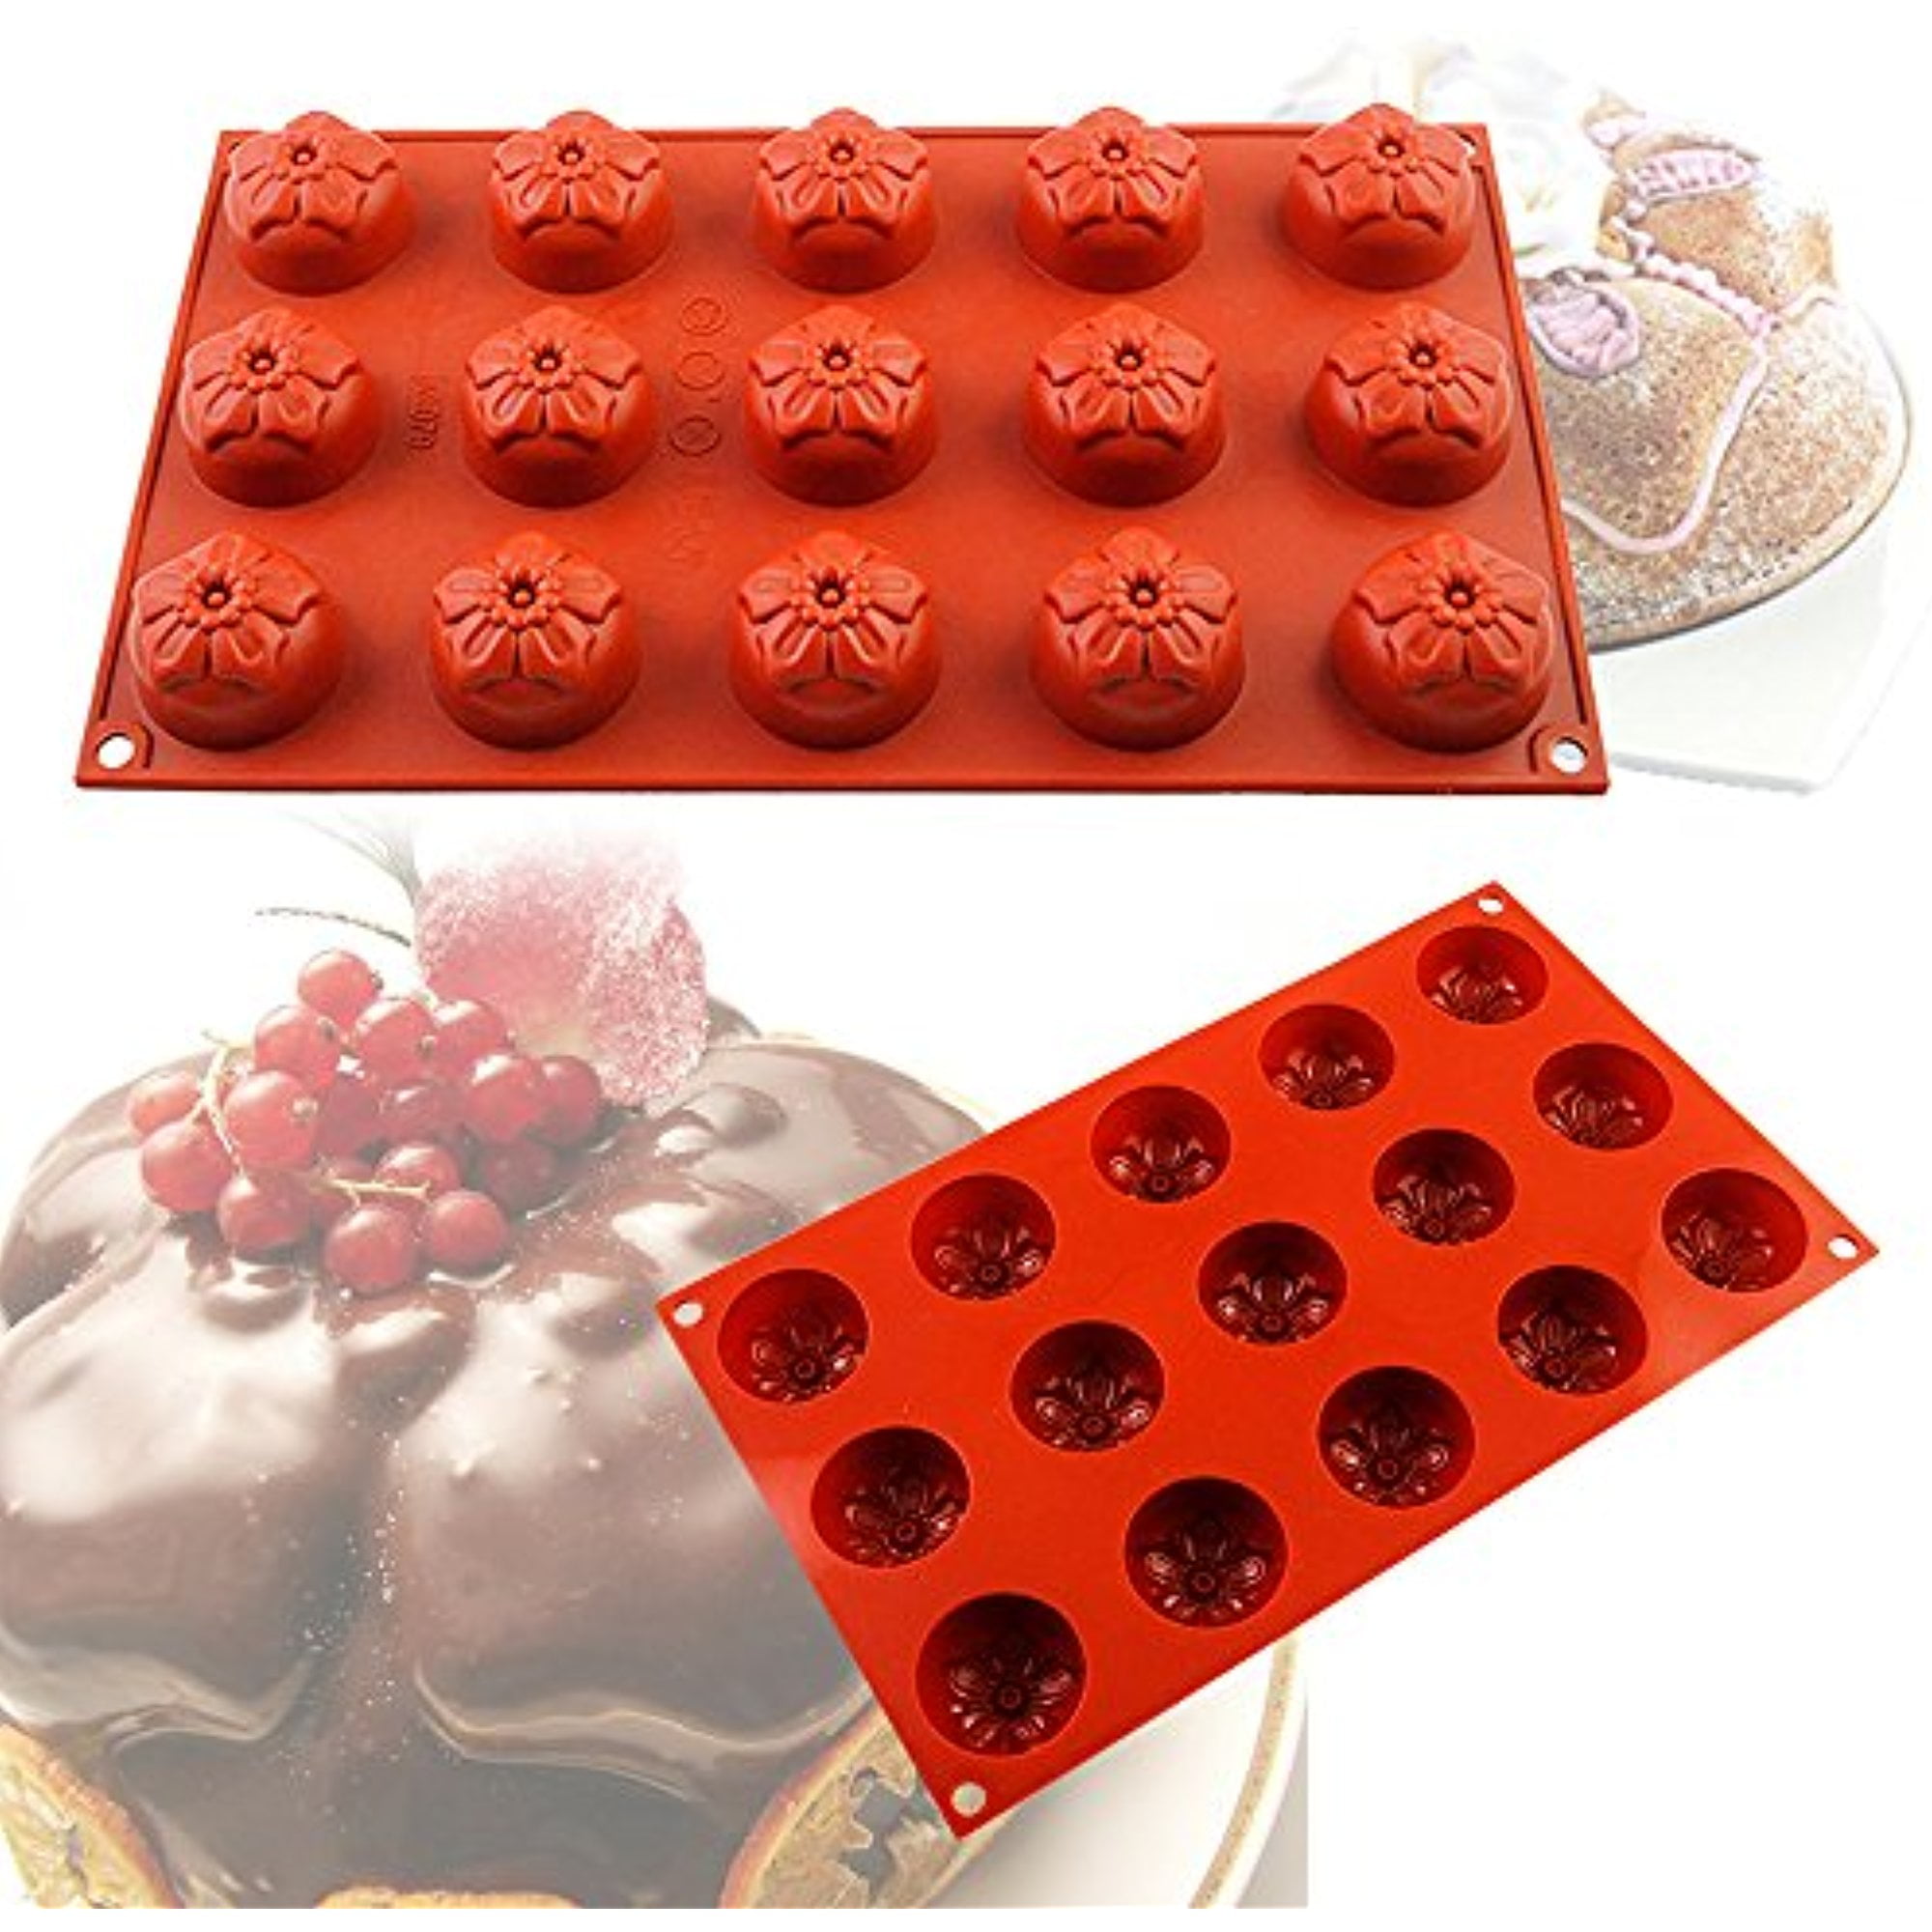 IClover 15-Cavity Oval Silicone Baking Mold Pan, Bakeware for Soap, Cake, Bread, Cupcake, Cheesecake, Cornbread, Muffin, Brownie, and More